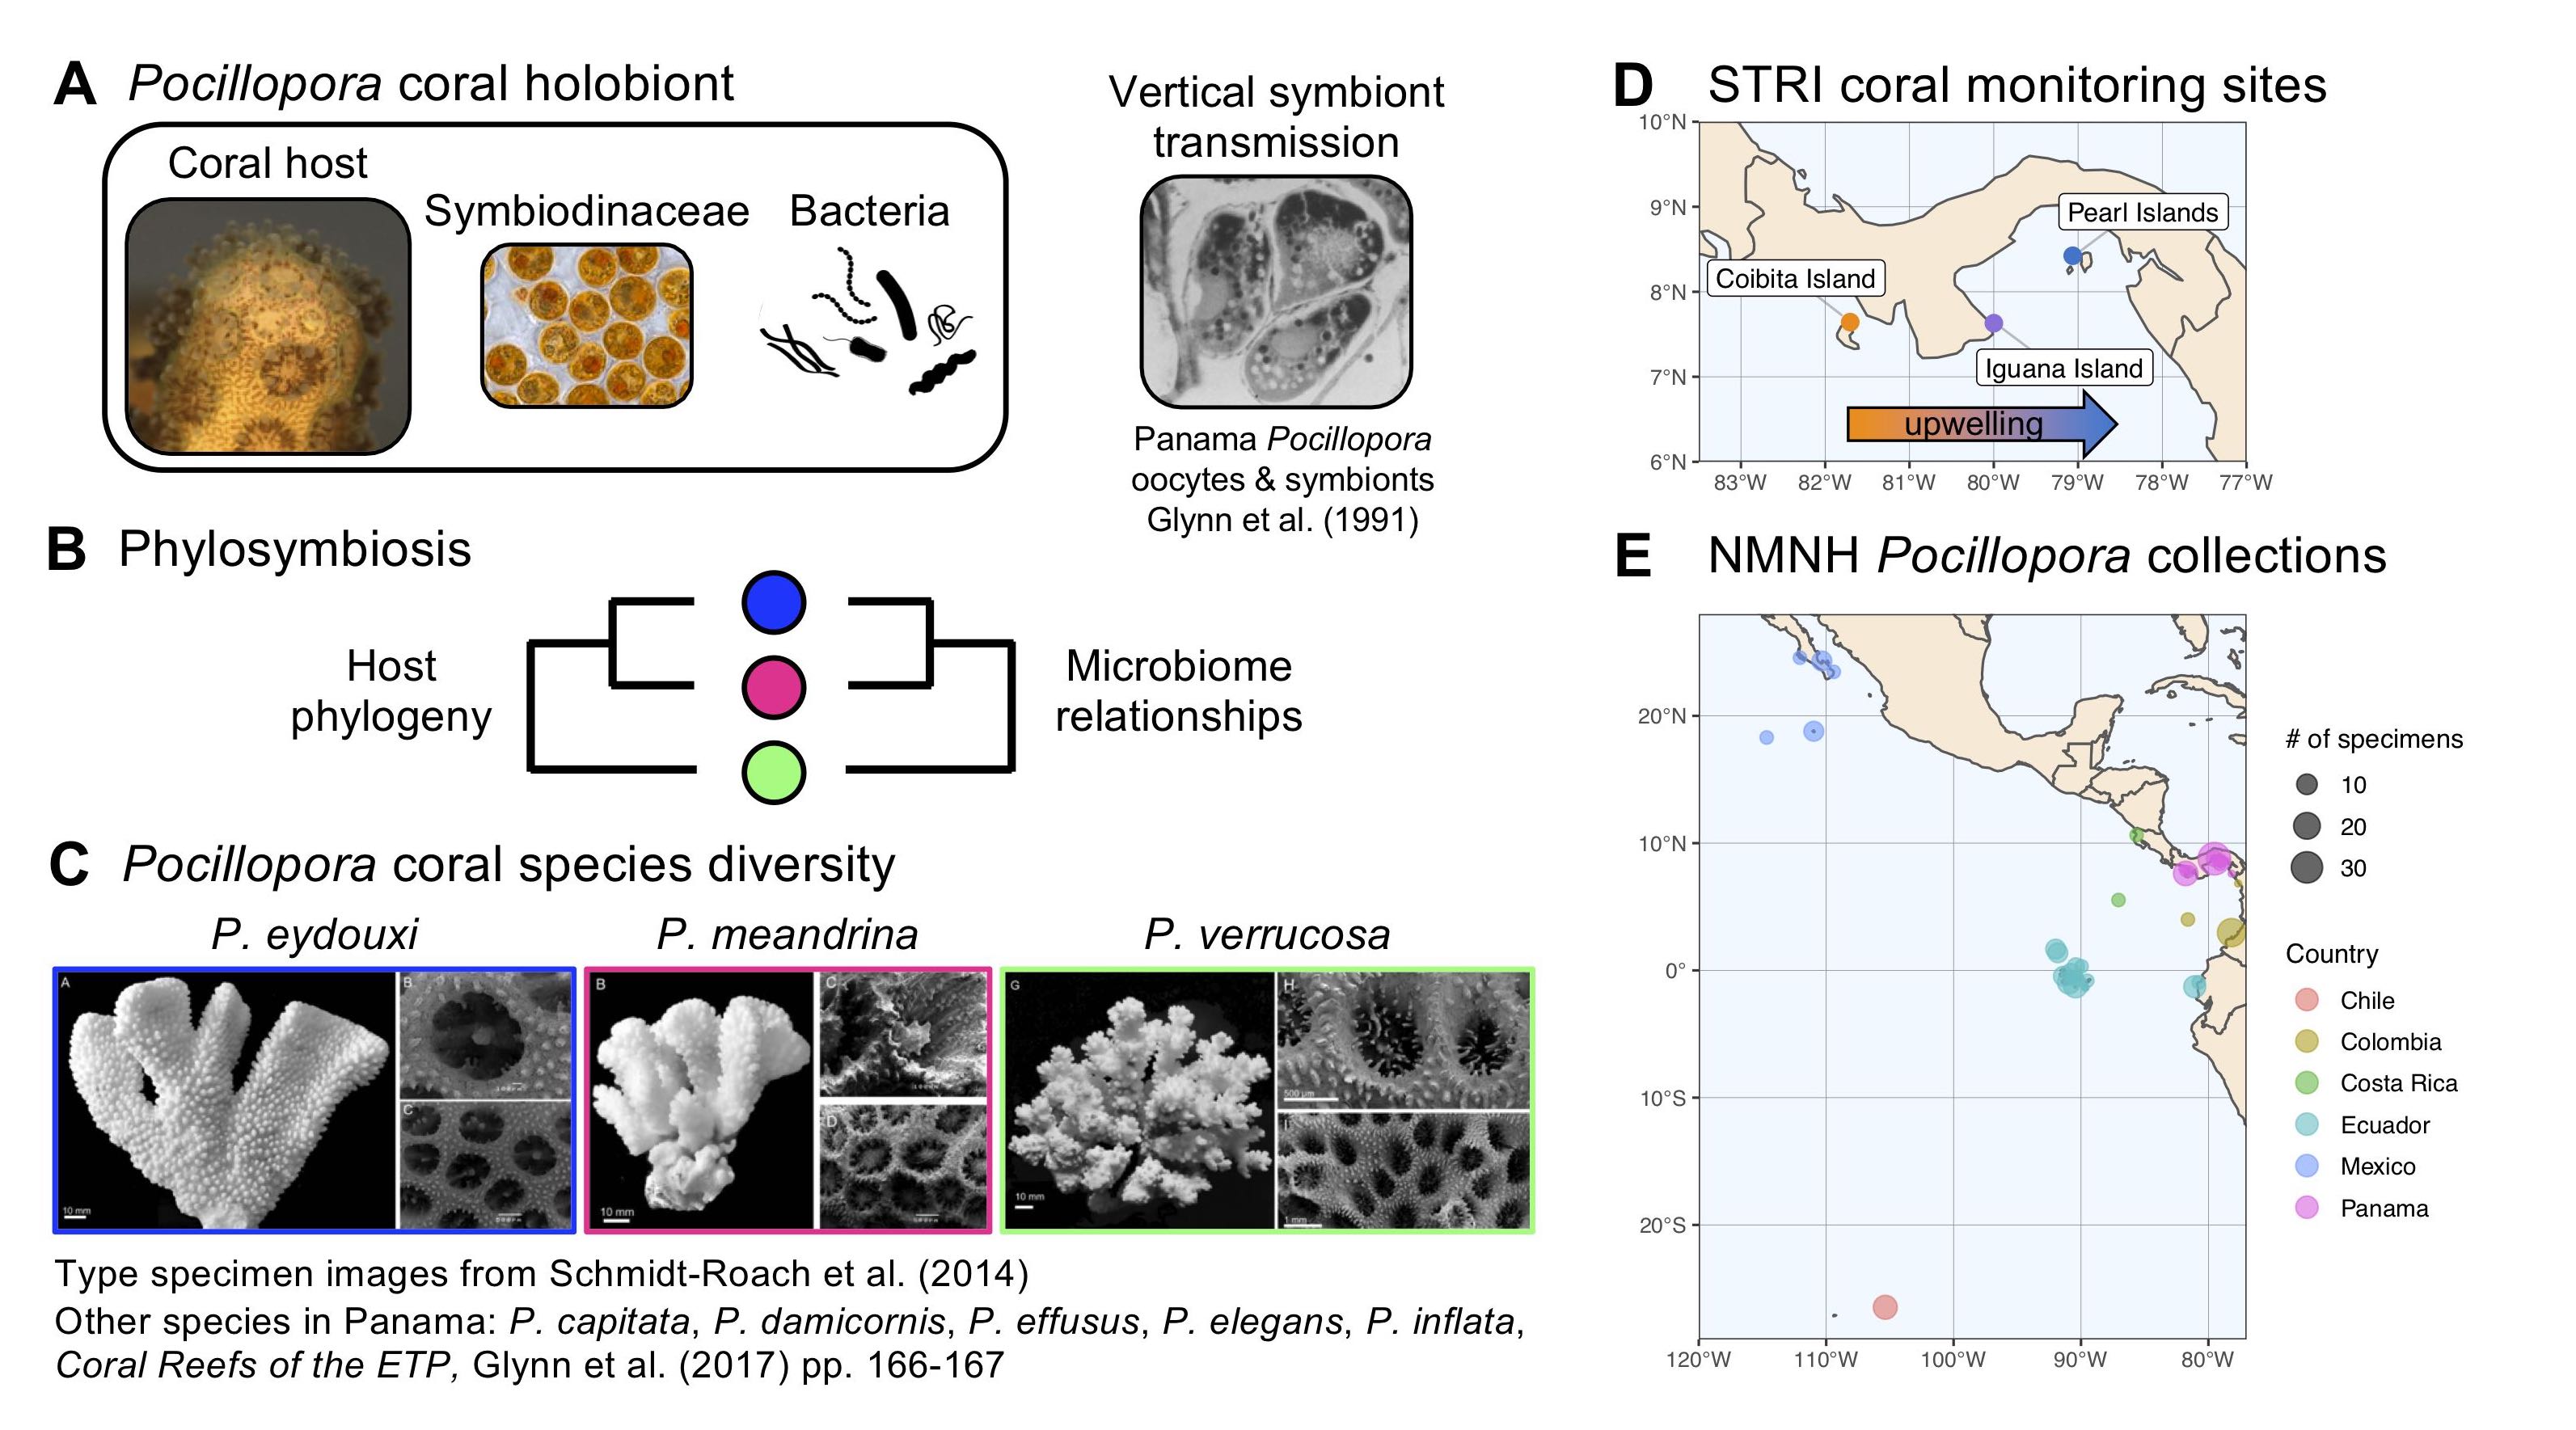 SI BioG project summary. (A) The Pocillopora coral holobiont comprises the coral host and symbiotic algae and bacteria, some of which are transmitted between host generations. (B) Phylosymbiosis occurs when the relationships between symbiotic microbial communities recapitulate host phylogenetic relationships. (C) Coral branch morphology and corallite microstructure for three Pocillopora species last revised in Schmidt-Roach et al. (2014), correspondence between genetics and morphological characters has not been assessed for the eight morphospecies that are present in Panamá. (D) Location of STRI coral monitoring sites in the Gulf of Chiriquí and Gulf of Panamá. (E) Locations and numbers of preserved Pocillopora coral specimens in the NMNH Invertebrate Zoology collections.